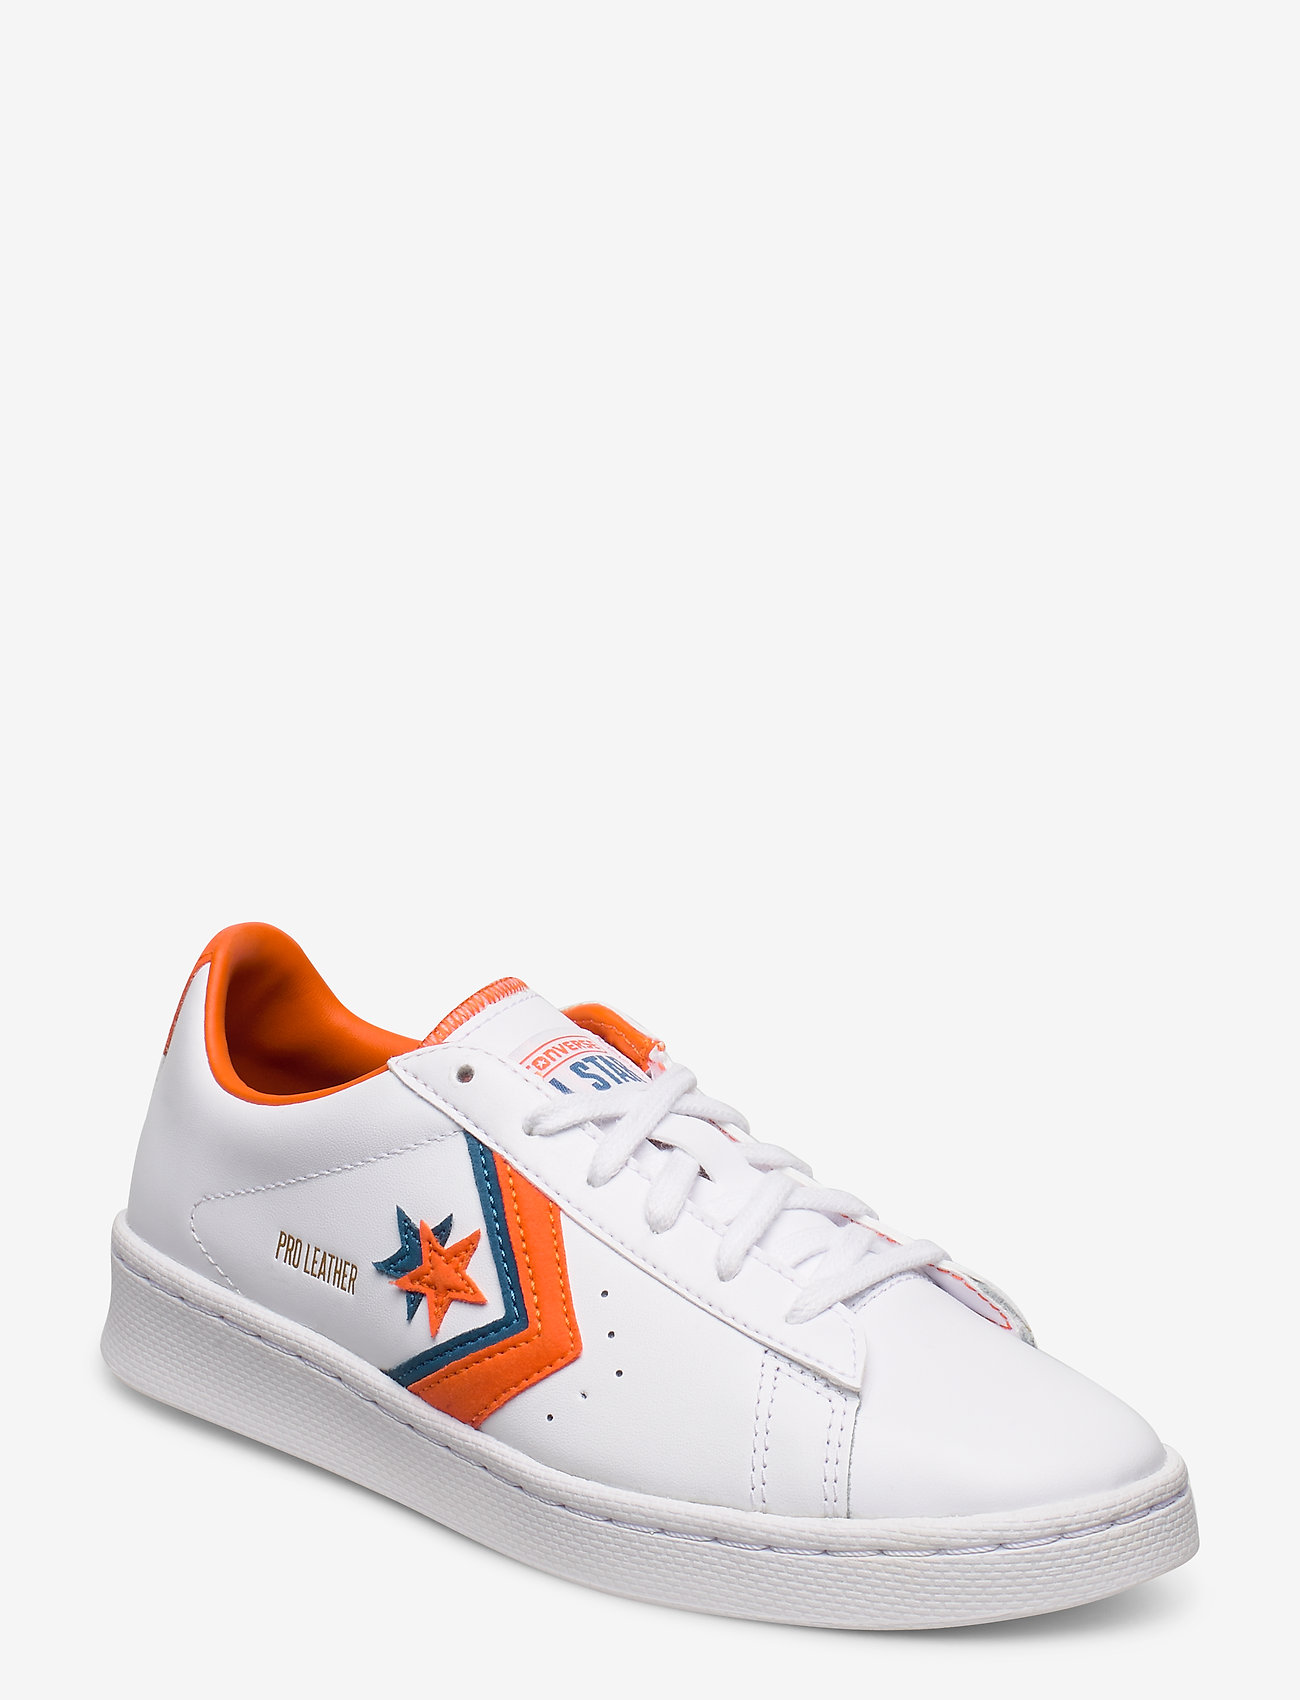 converse pro leather low top